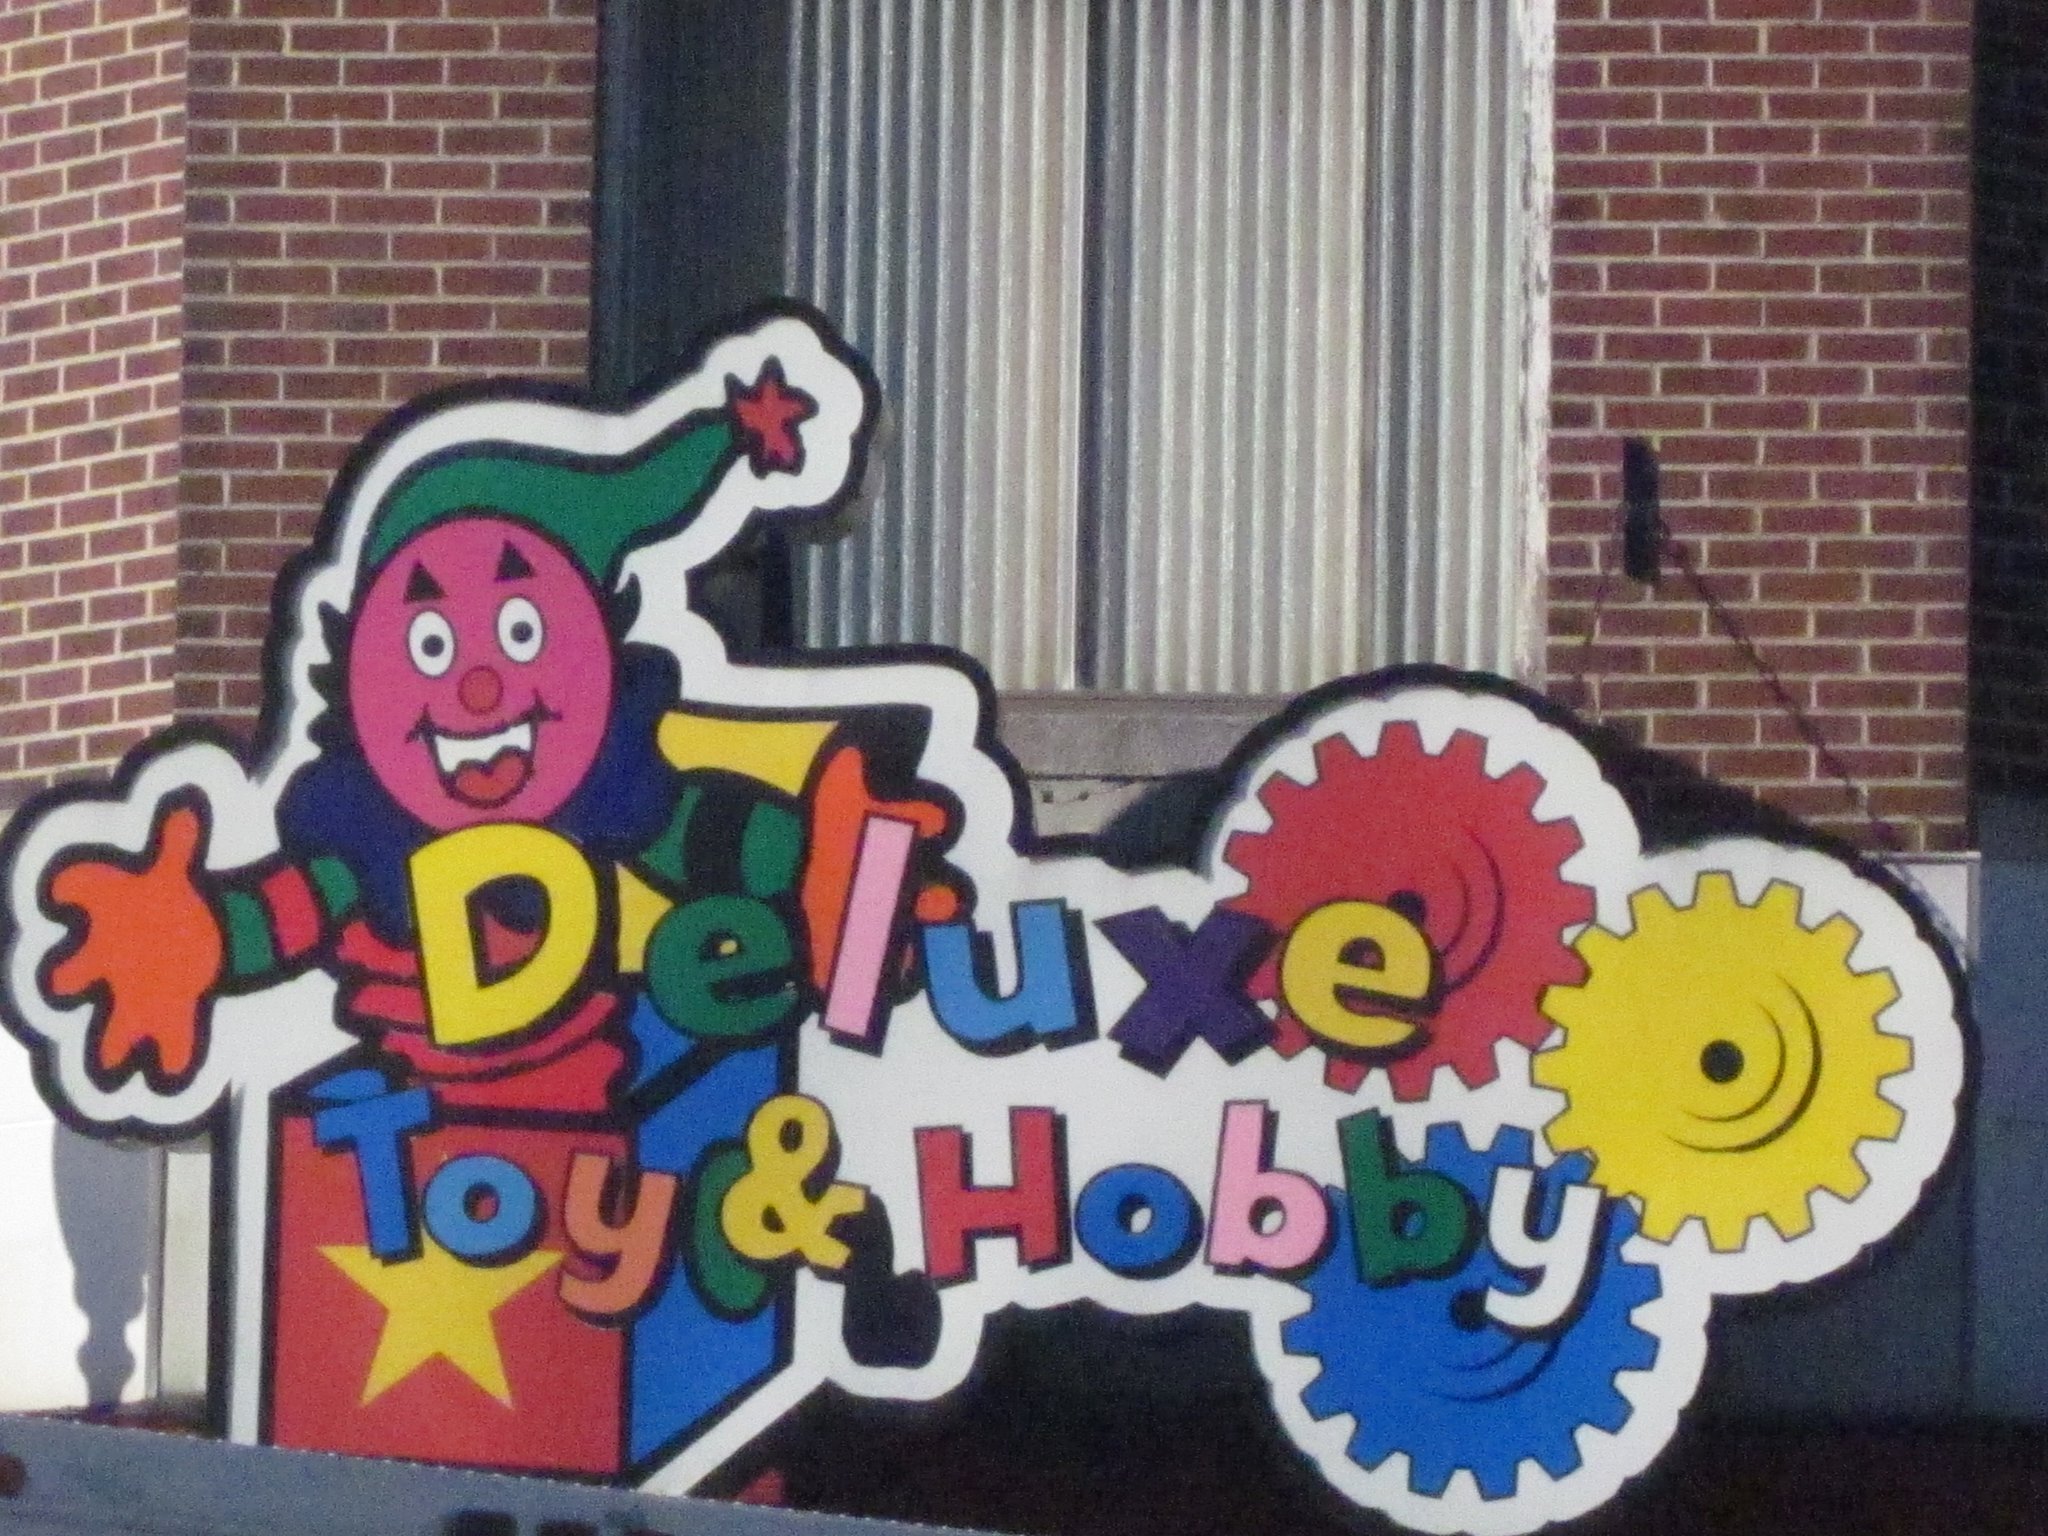 Deluxe Toy and Hobby